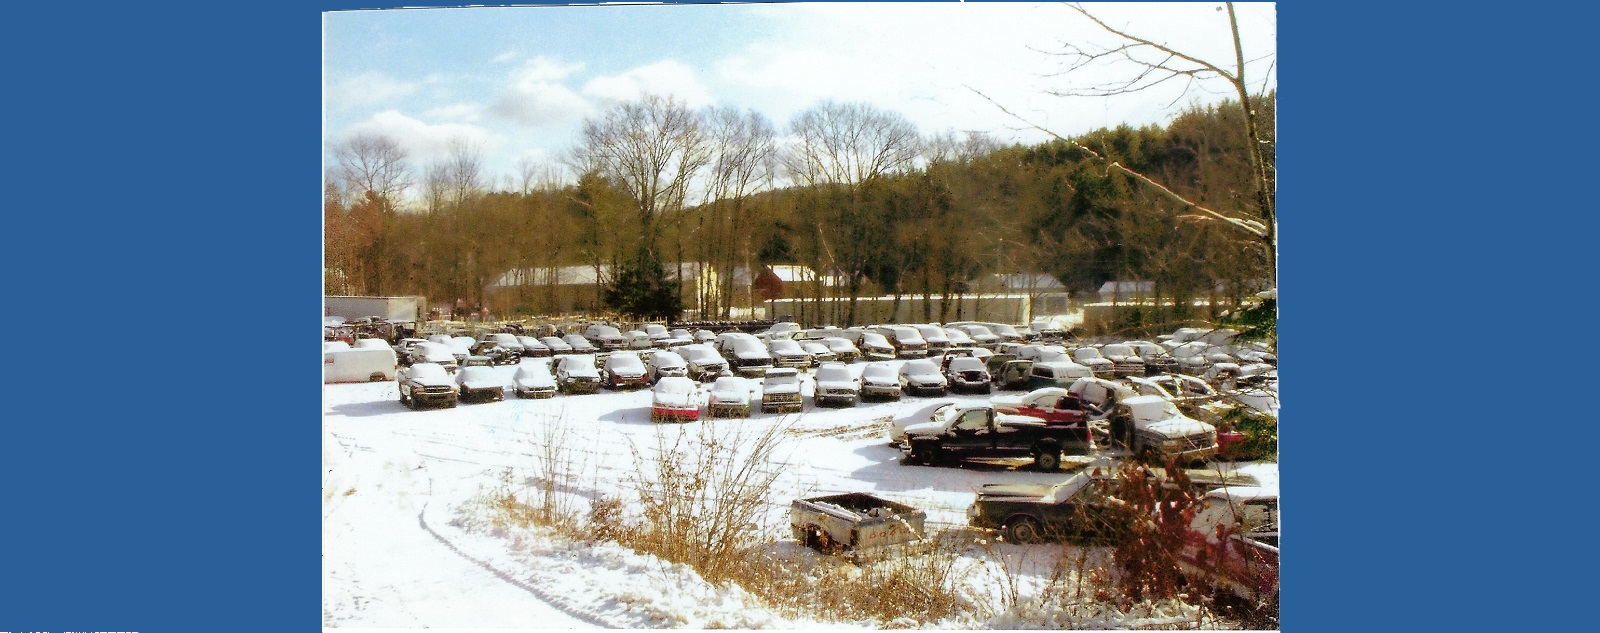 Rows of cars parked in a snowy lot.